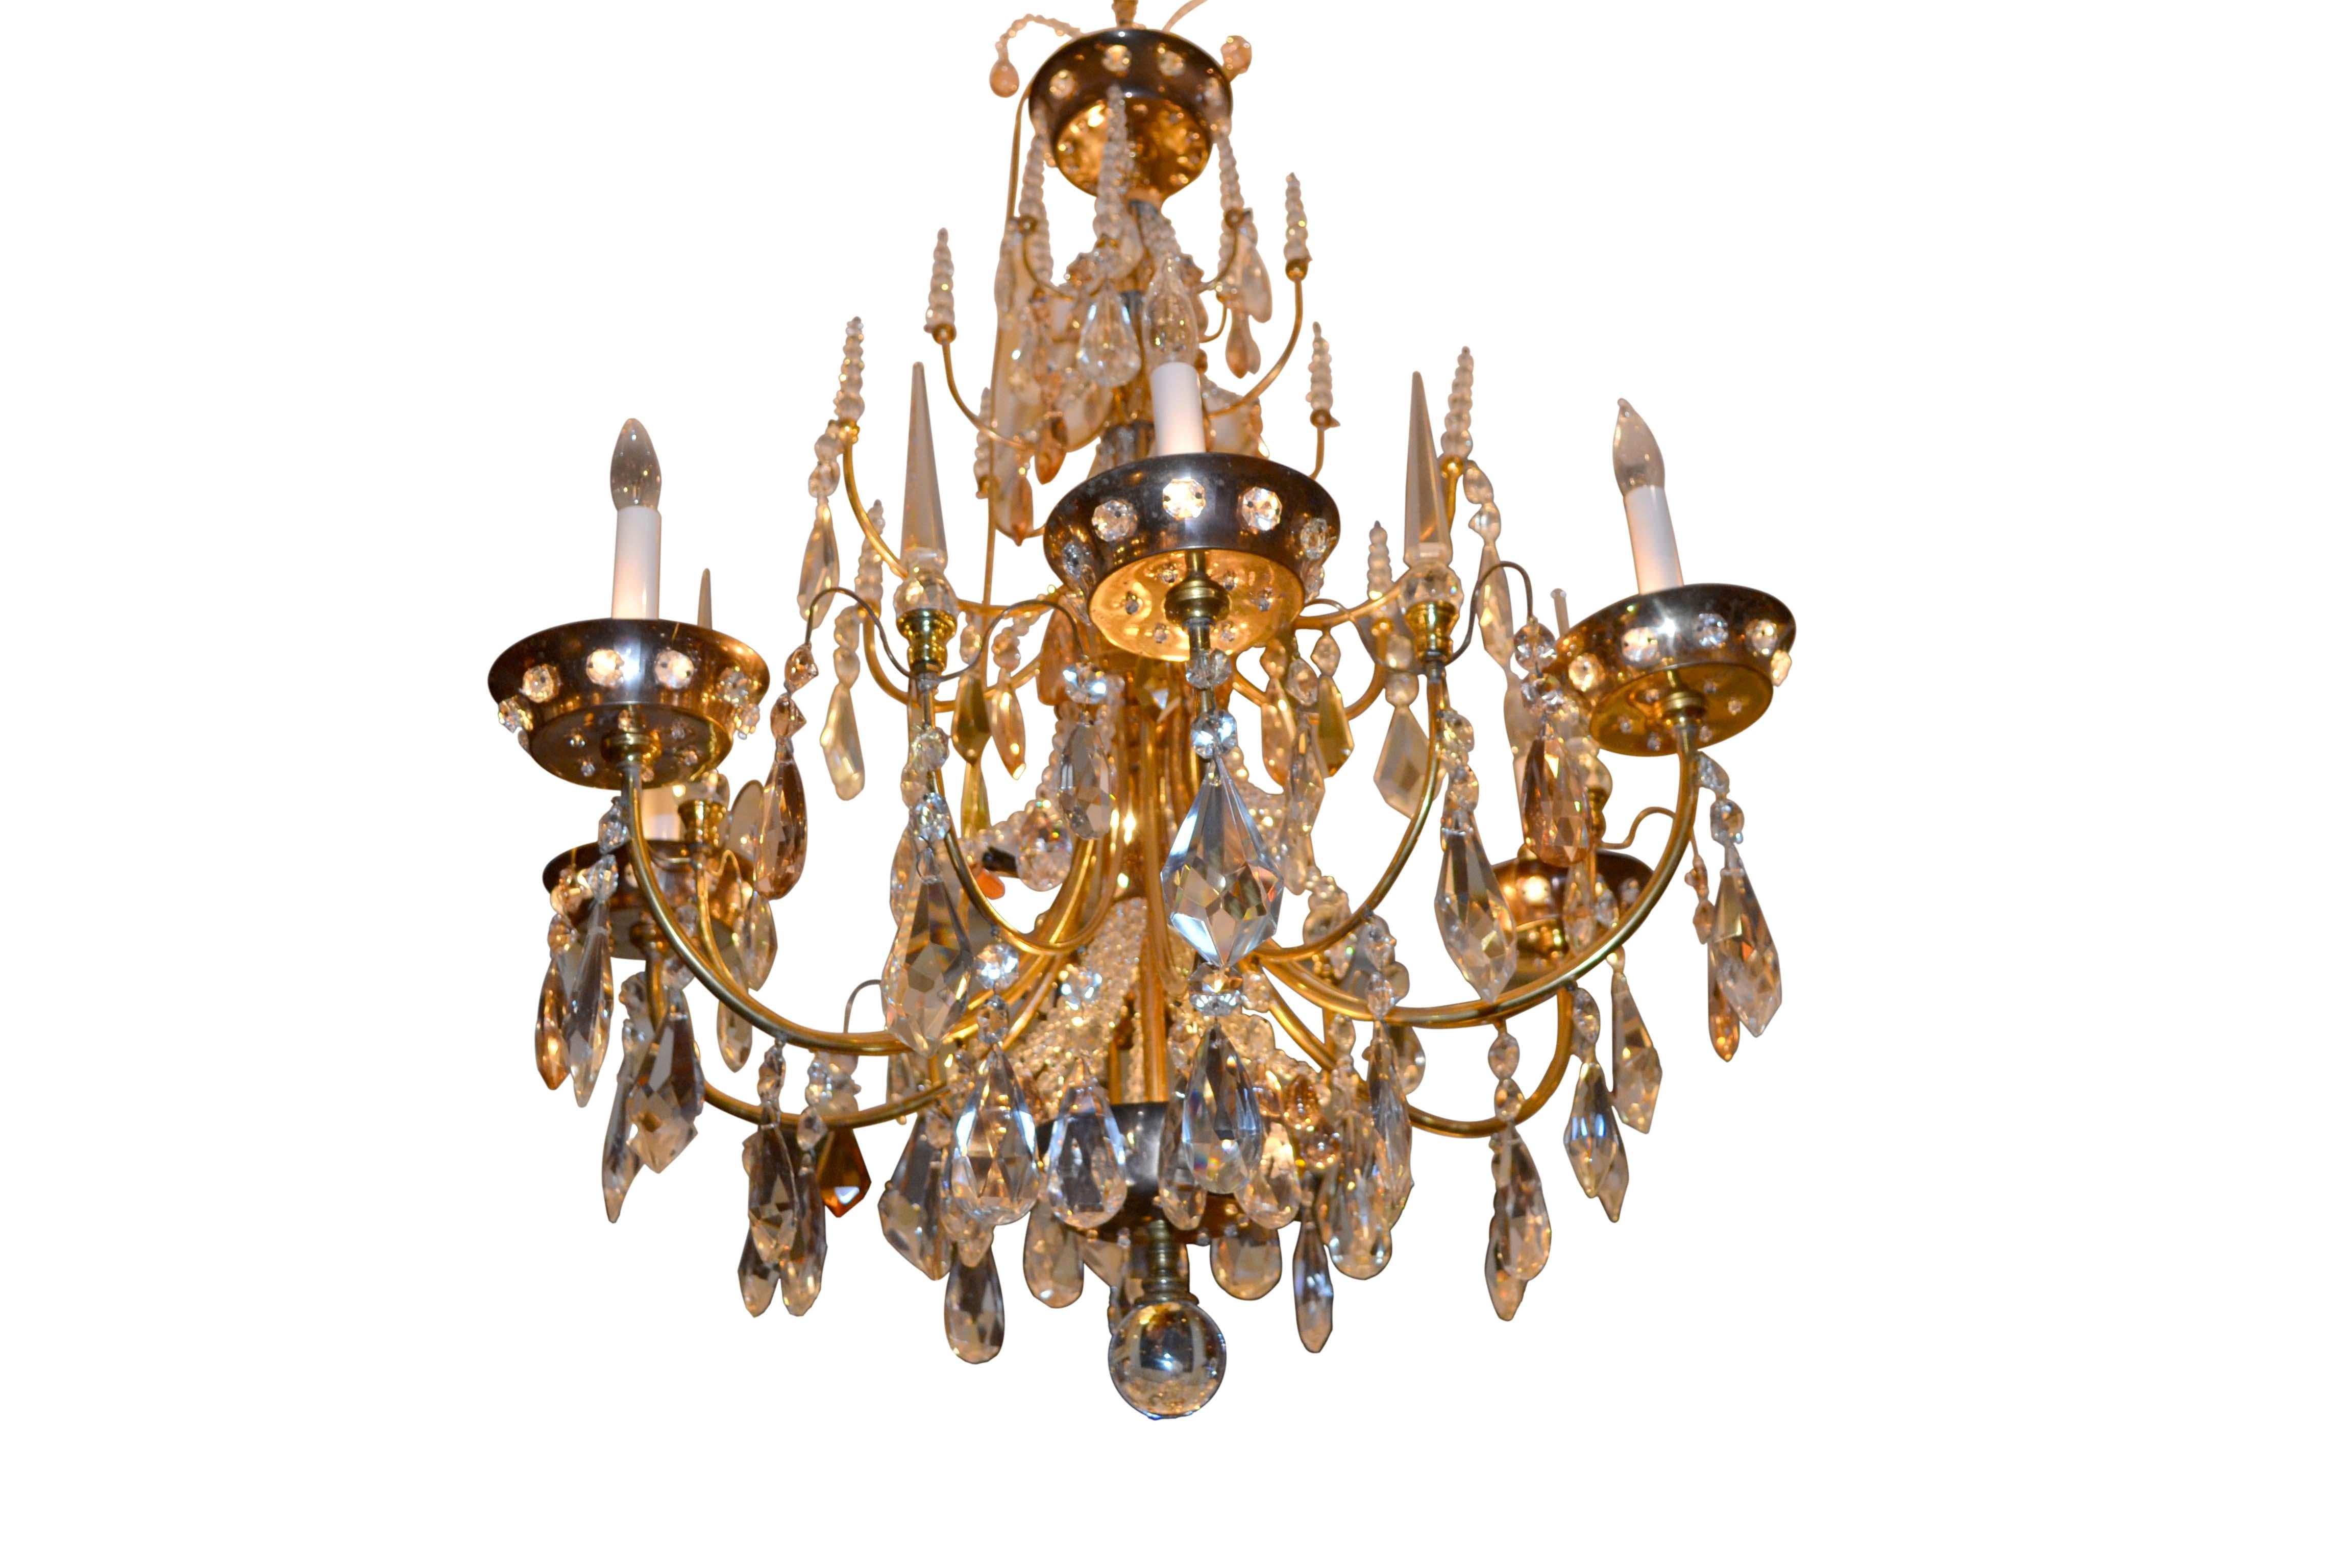 A gilded metal and crystal chandelier of classical design typical of fixtures from the 1920s made by the company Baguès in Paris, the leading lighting firm during the first half of the 20th century. The central stem supports four tiers of decorative